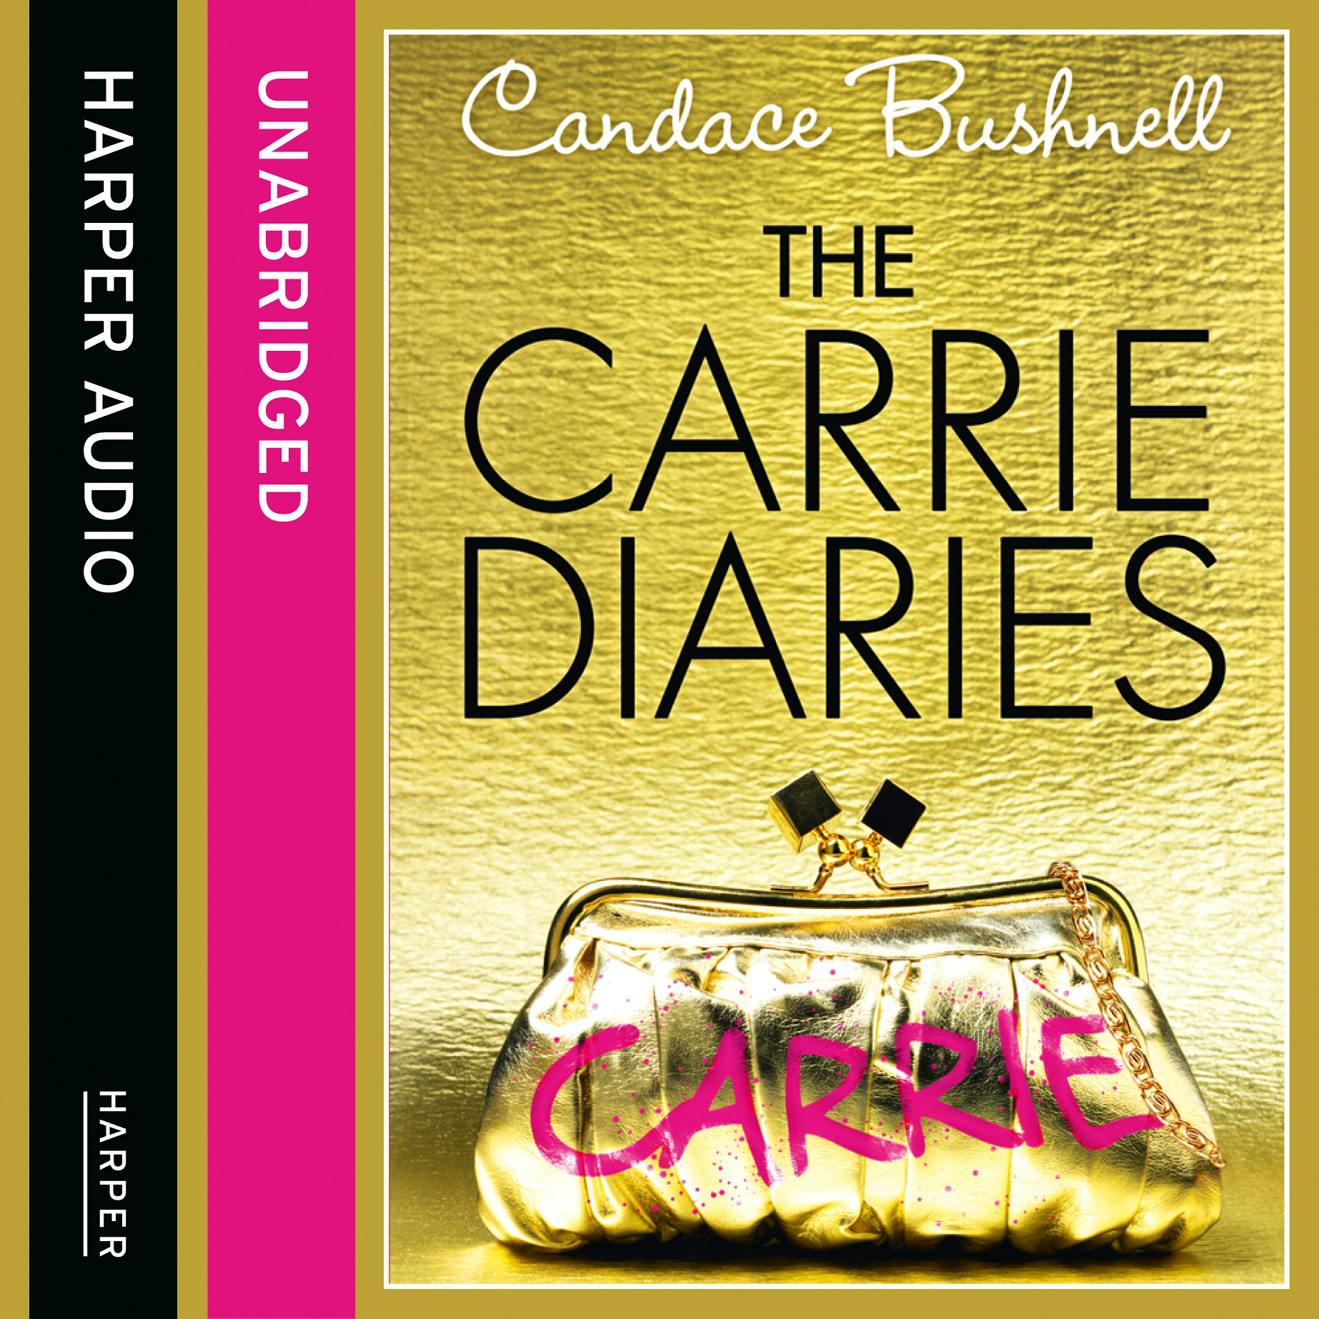 The Carrie Diaries (The Carrie Diaries, Book 1) - Candace Bushnell